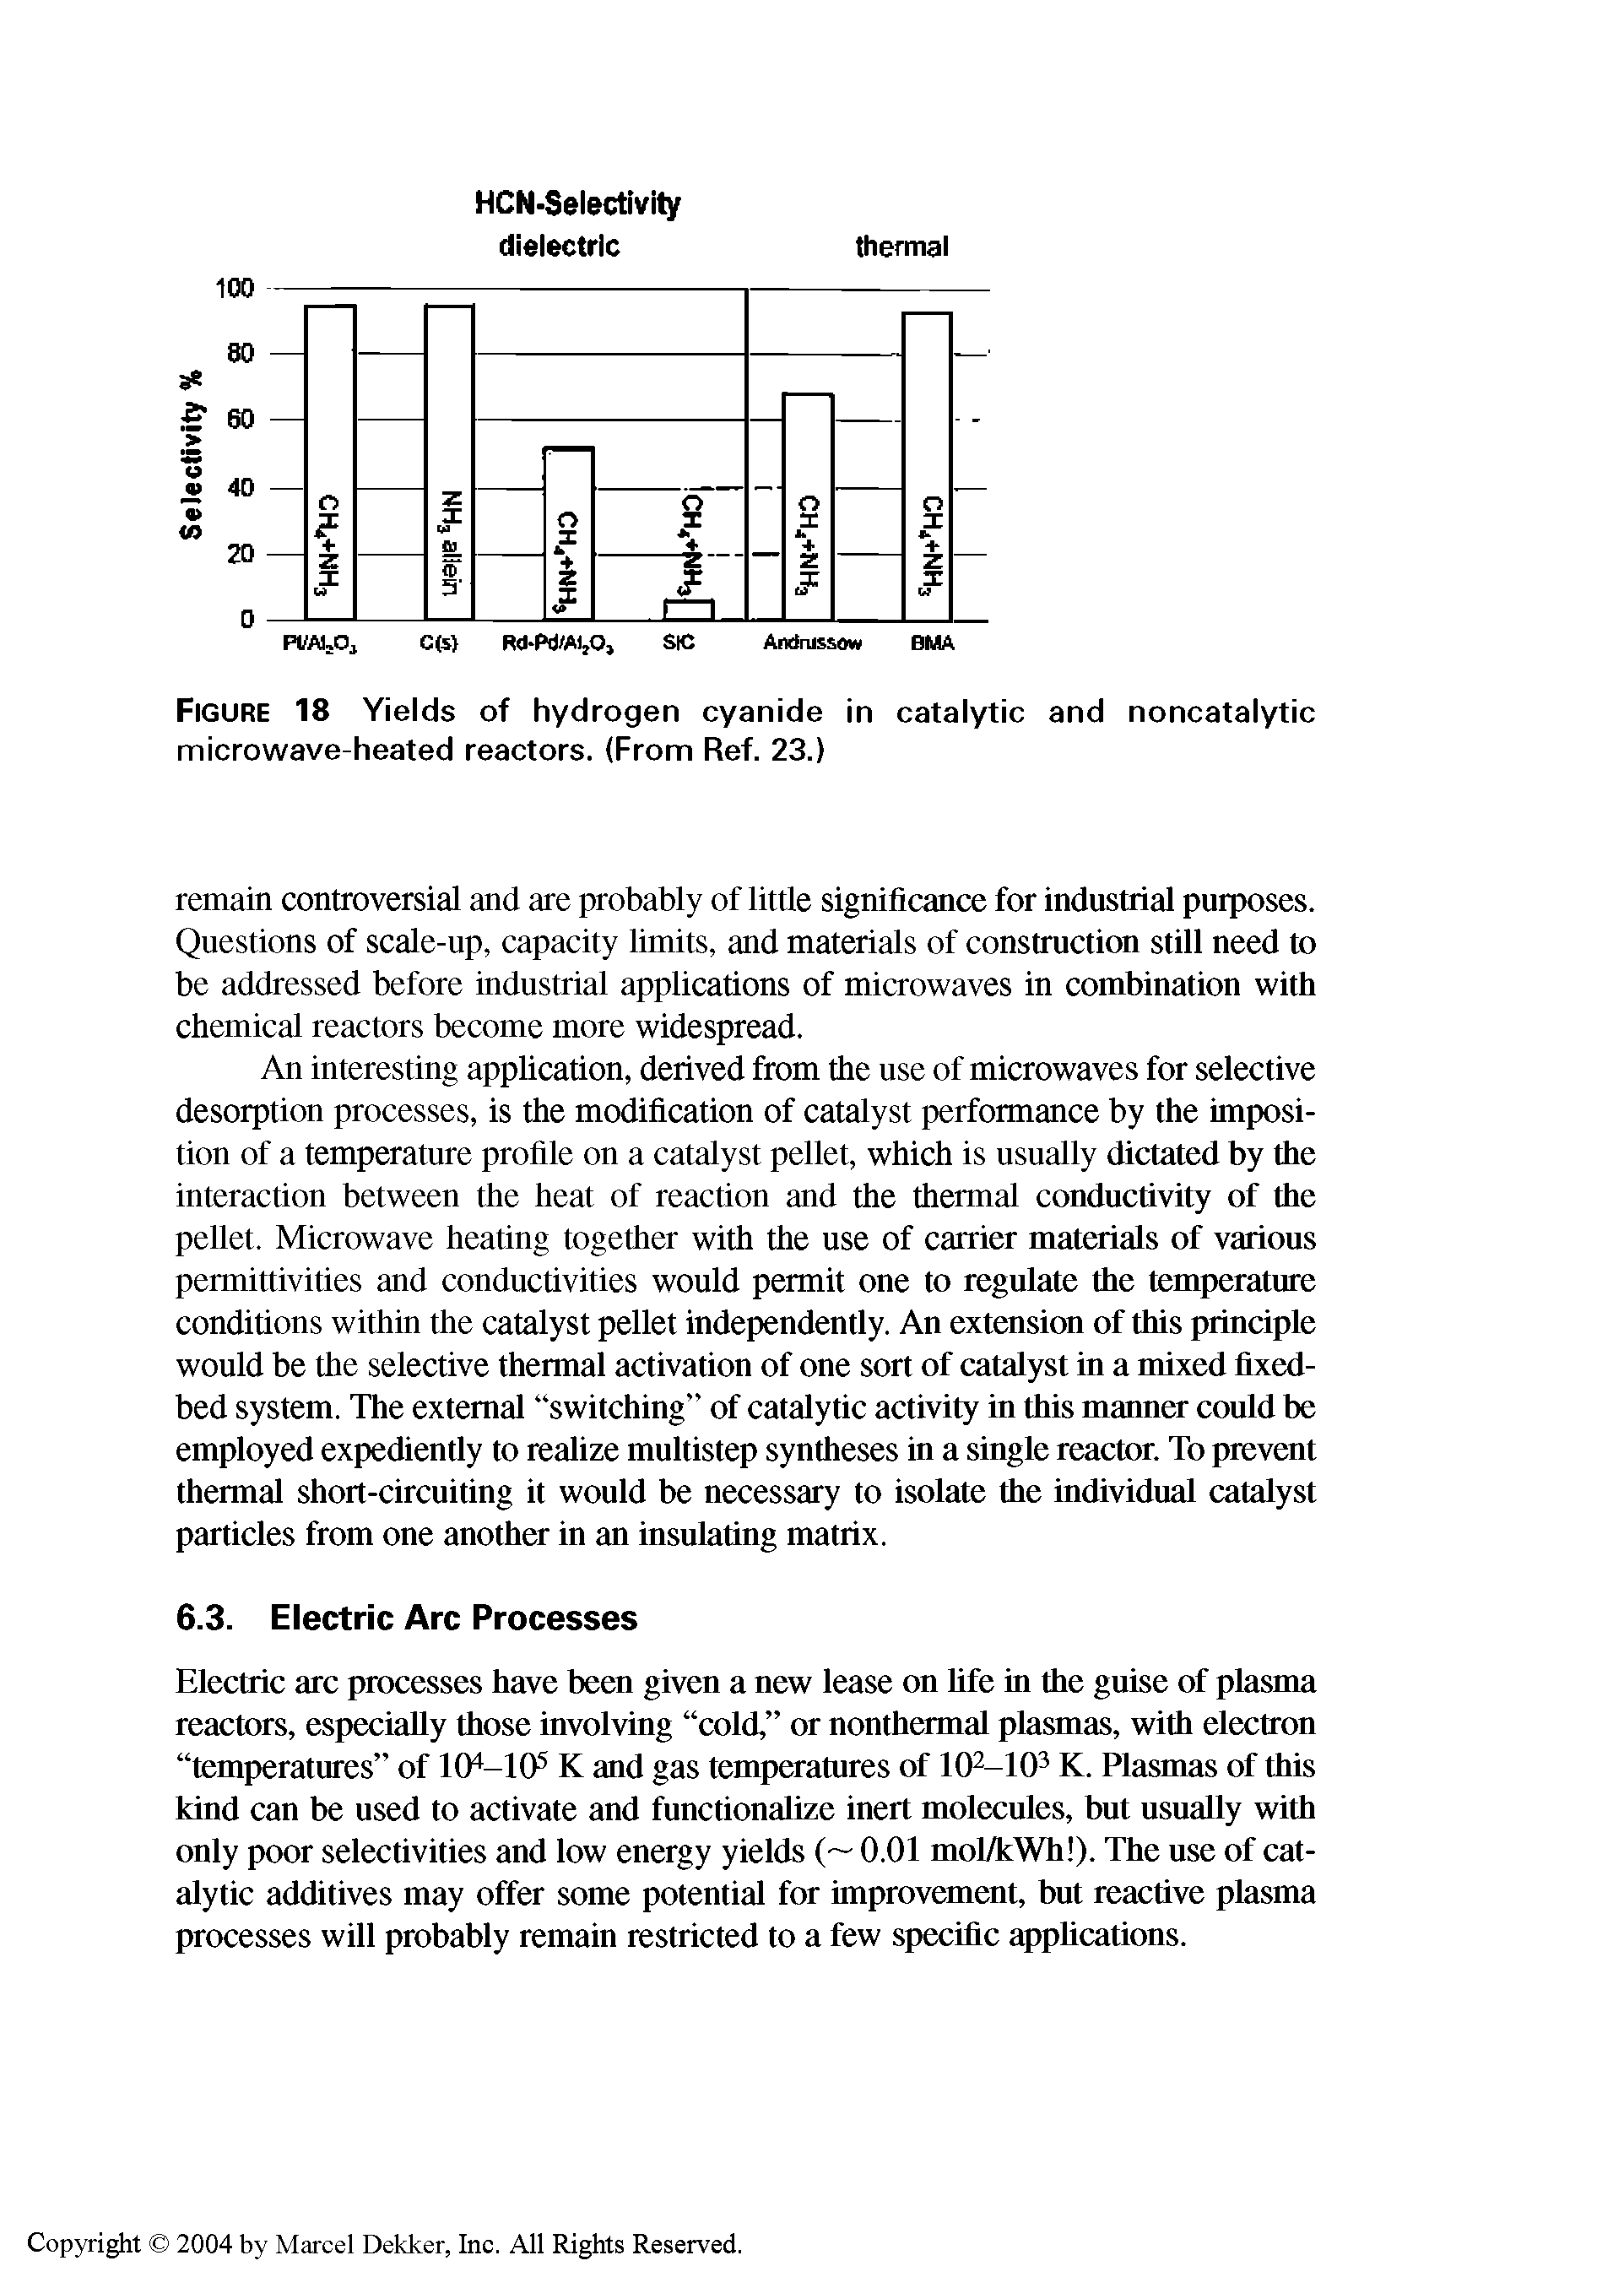 Figure 18 Yields of hydrogen cyanide in catalytic and noncatalytic microwave-heated reactors. (From Ref. 23.)...